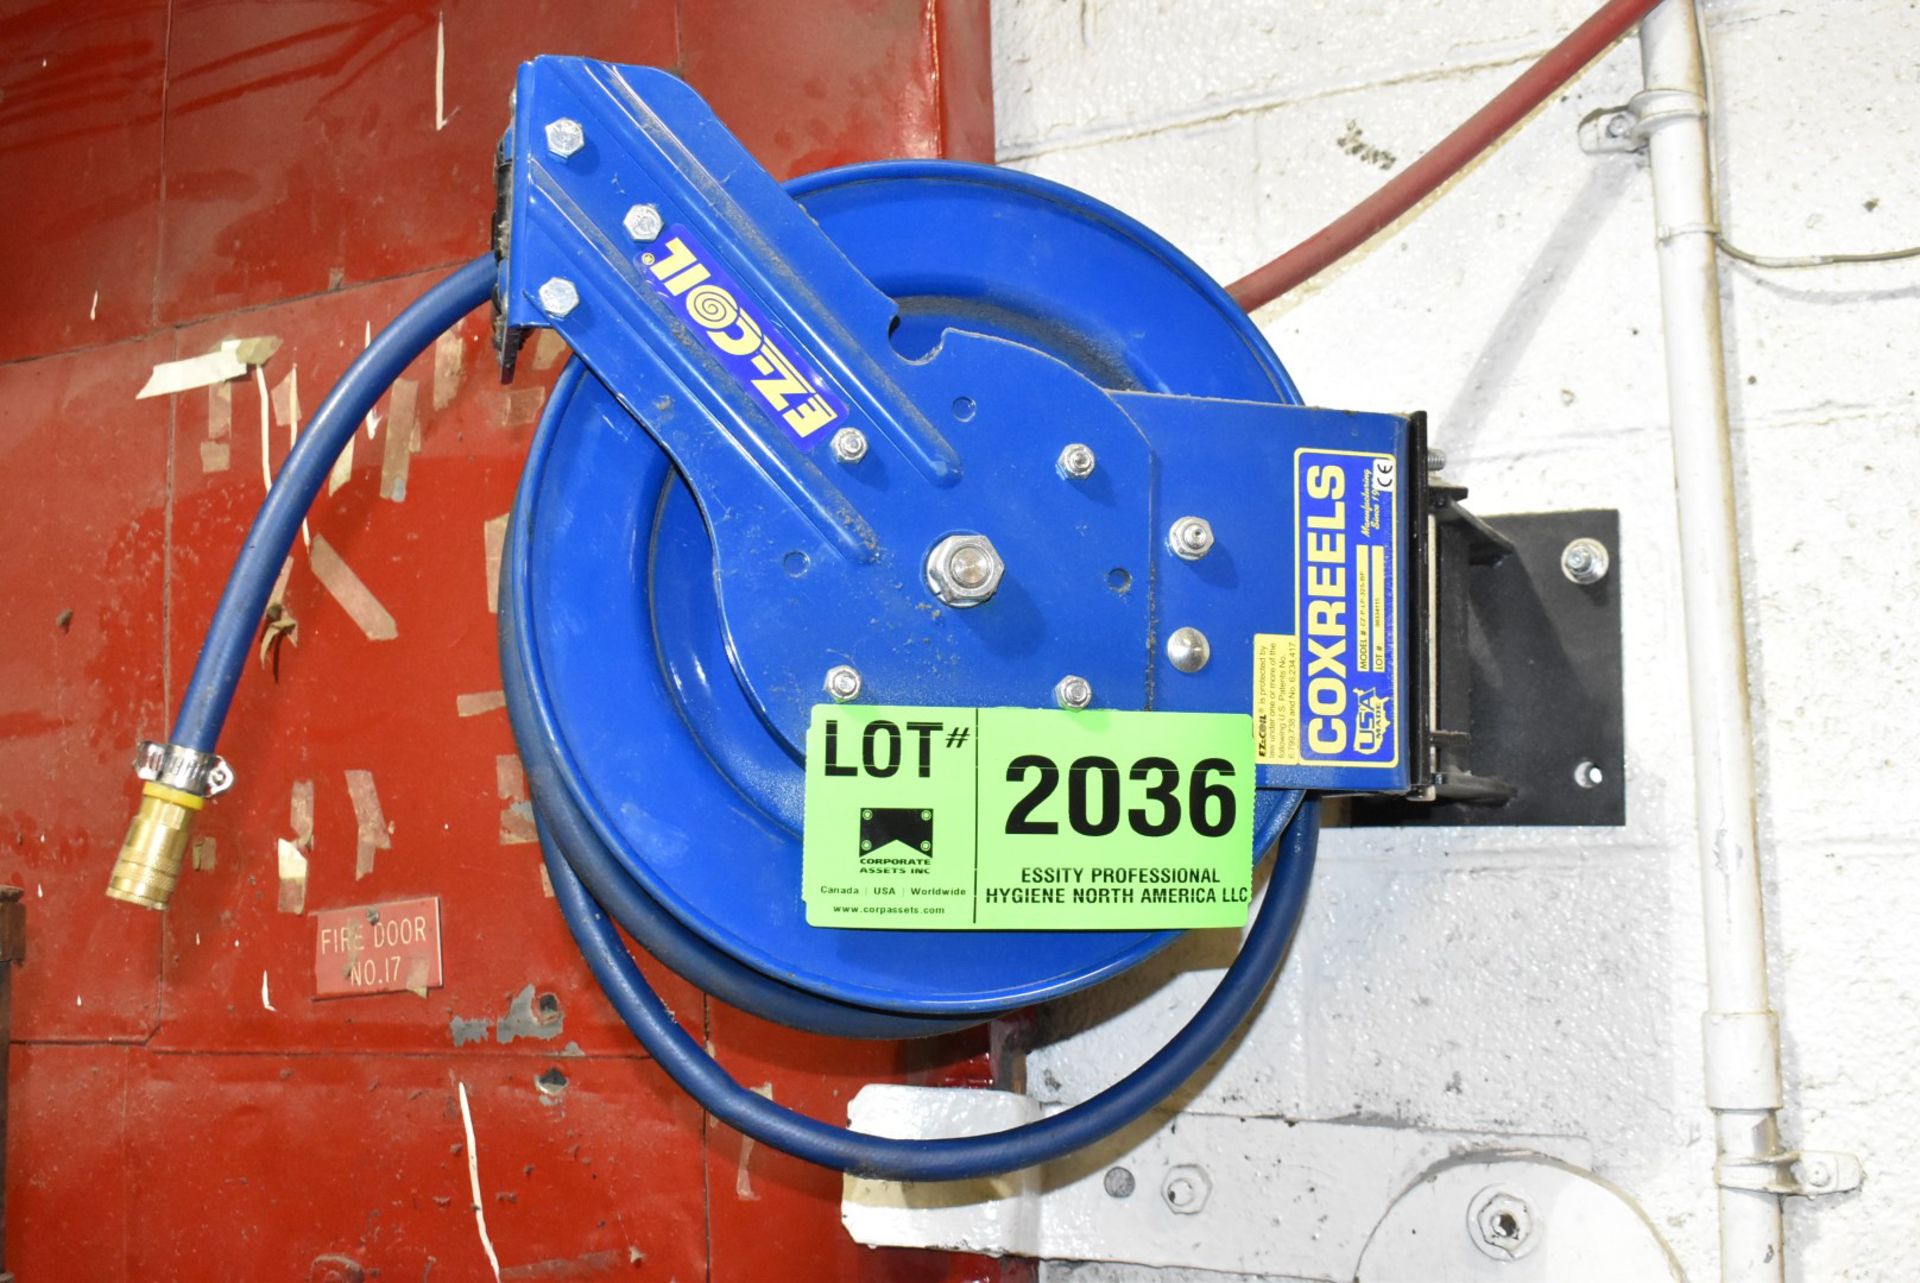 COXREEL RETRACTABLE HOSE REEL [RIGGING FEES FOR LOT #2036 - $25 USD PLUS APPLICABLE TAXES]